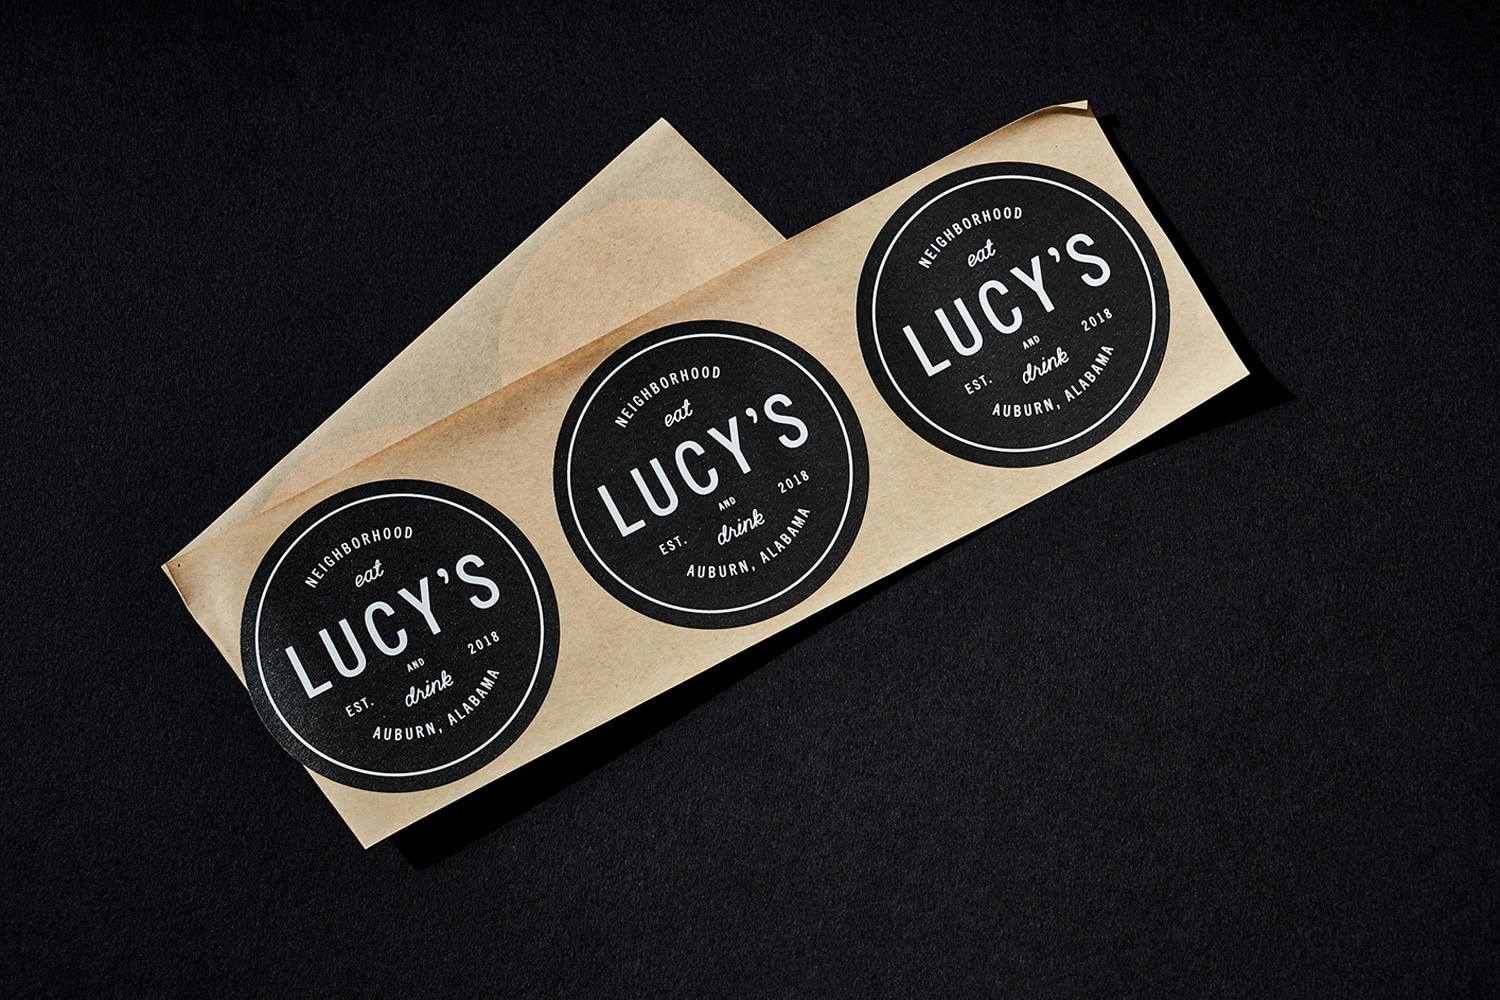 Lucy’s Eat and Drink | SDCO Partners